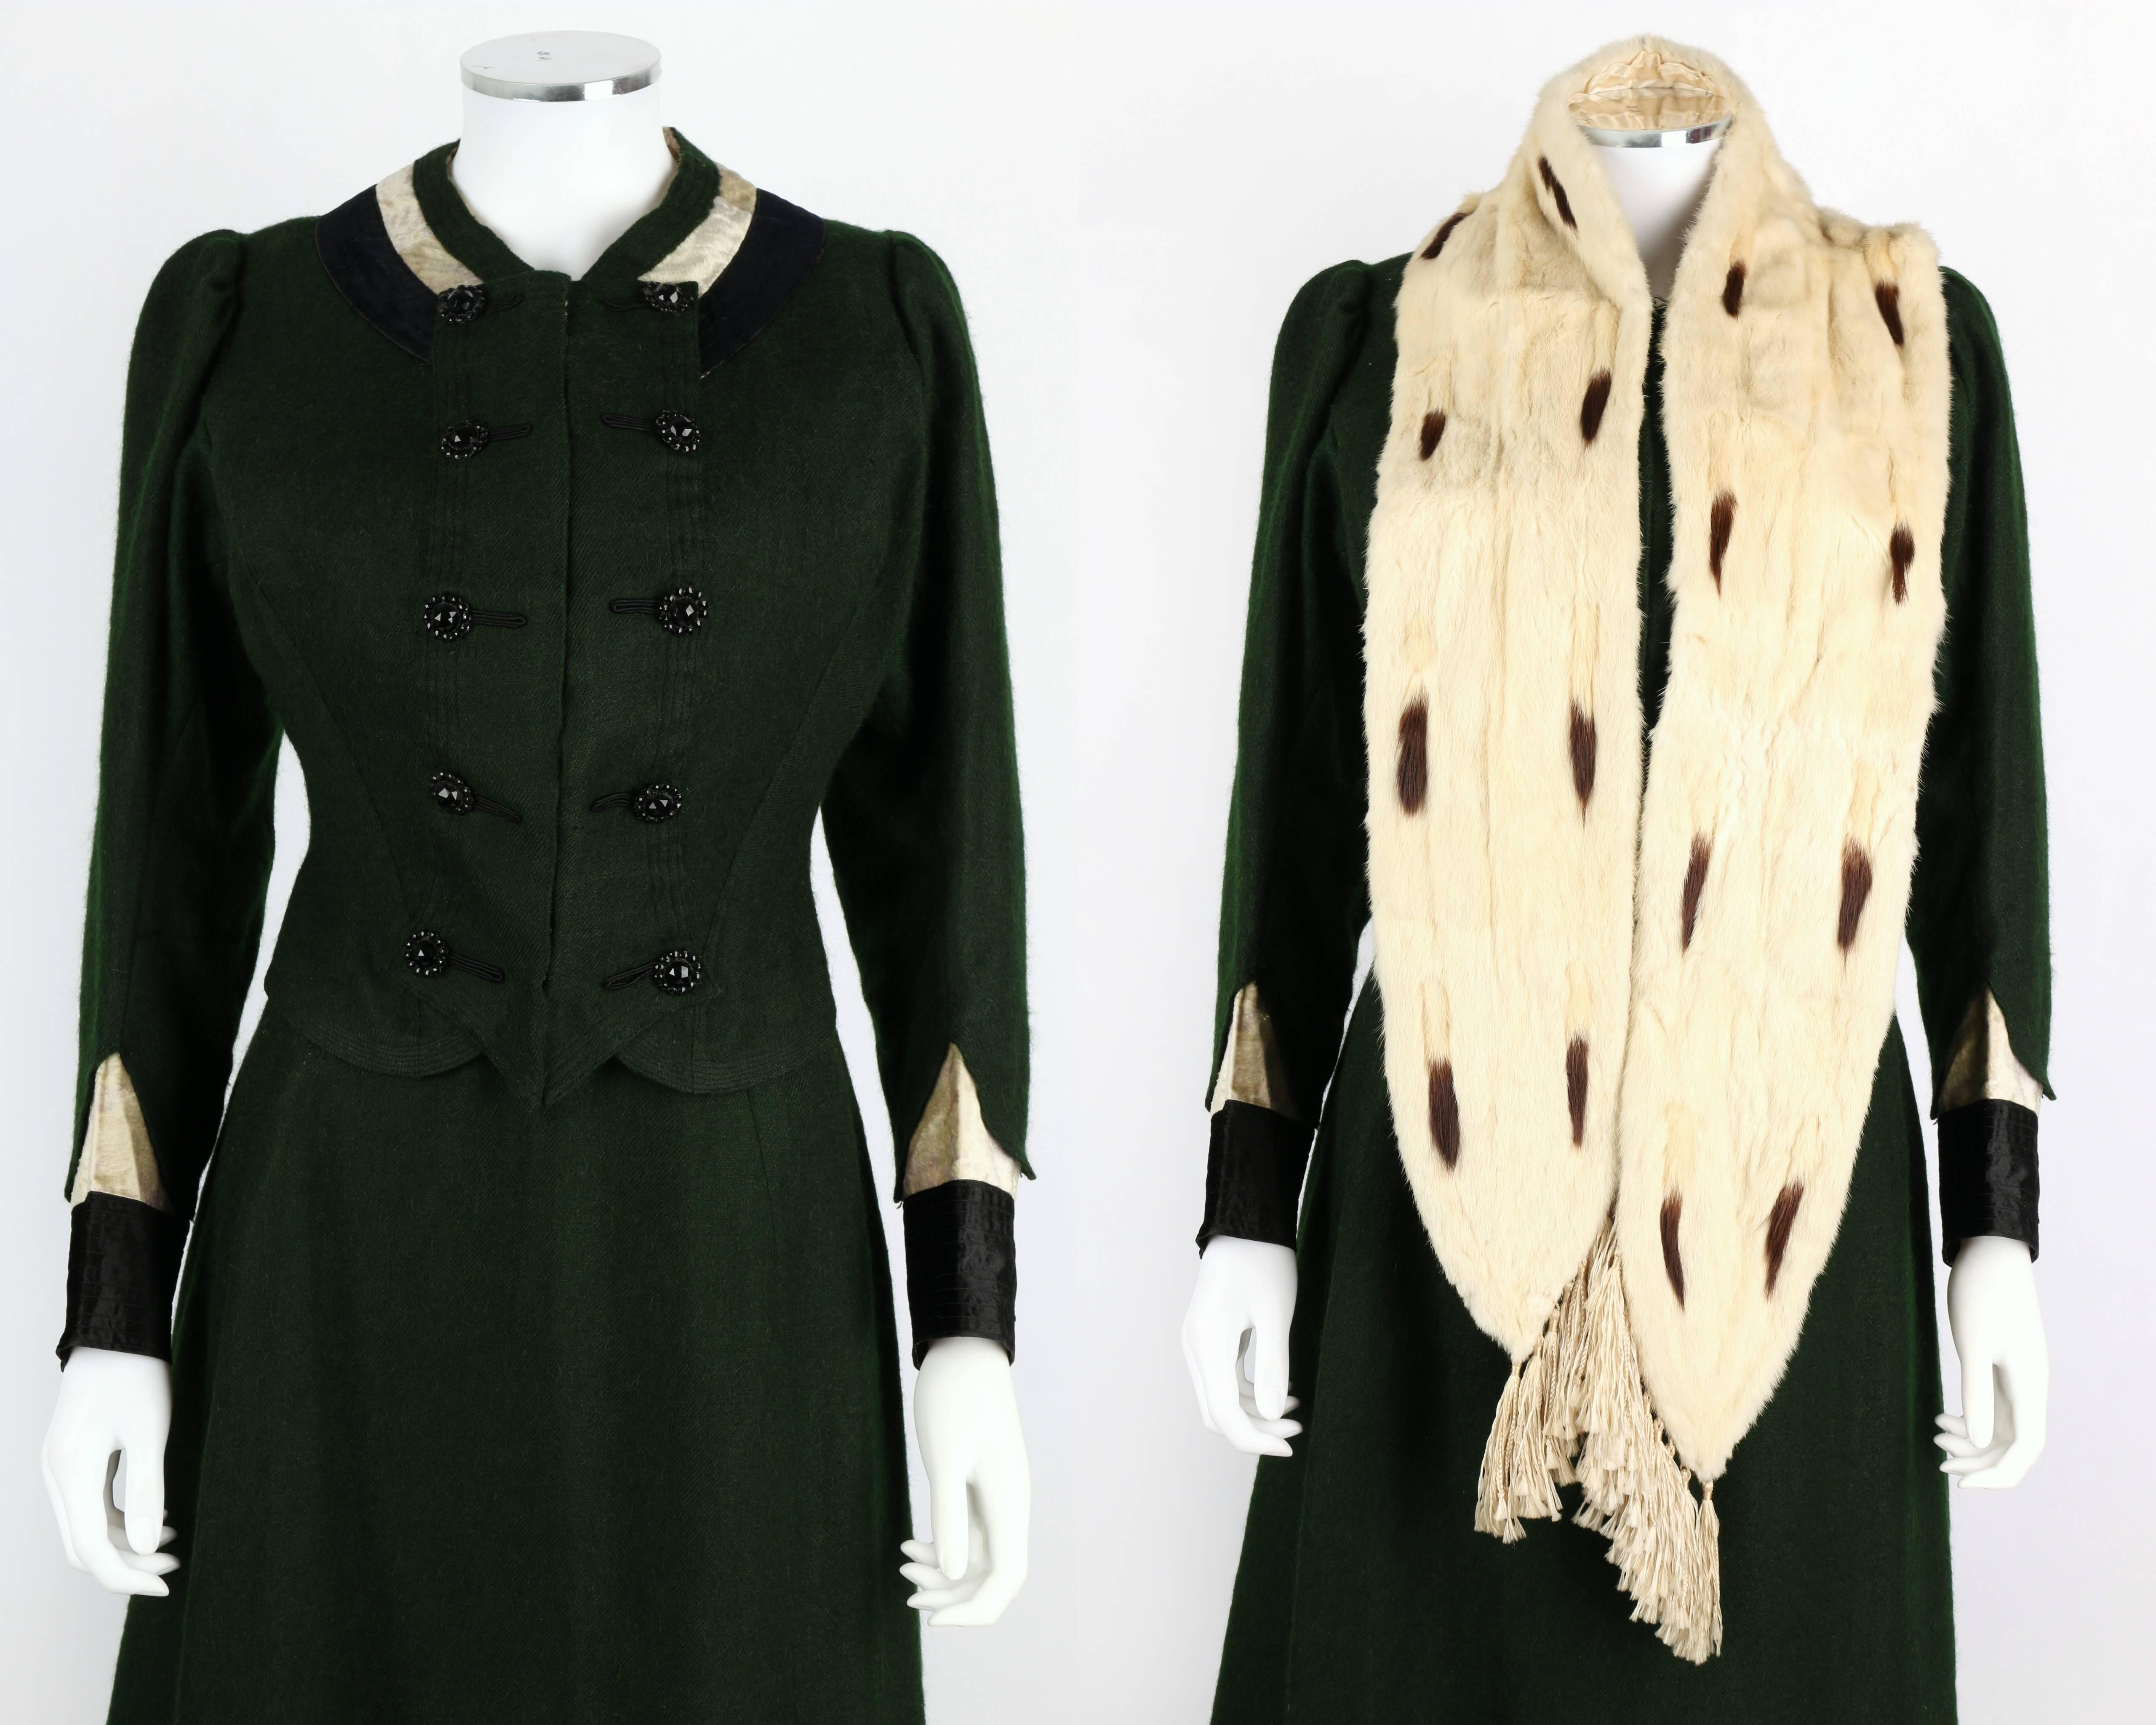 Rare turn of the century green wool two piece suit and genuine fur stole winter ensemble. Suit is trimmed with ivory and midnight blue plush. Jacket has jet button embellishment at front and closes with concealed hooks and eyes. Skirt is unlined and